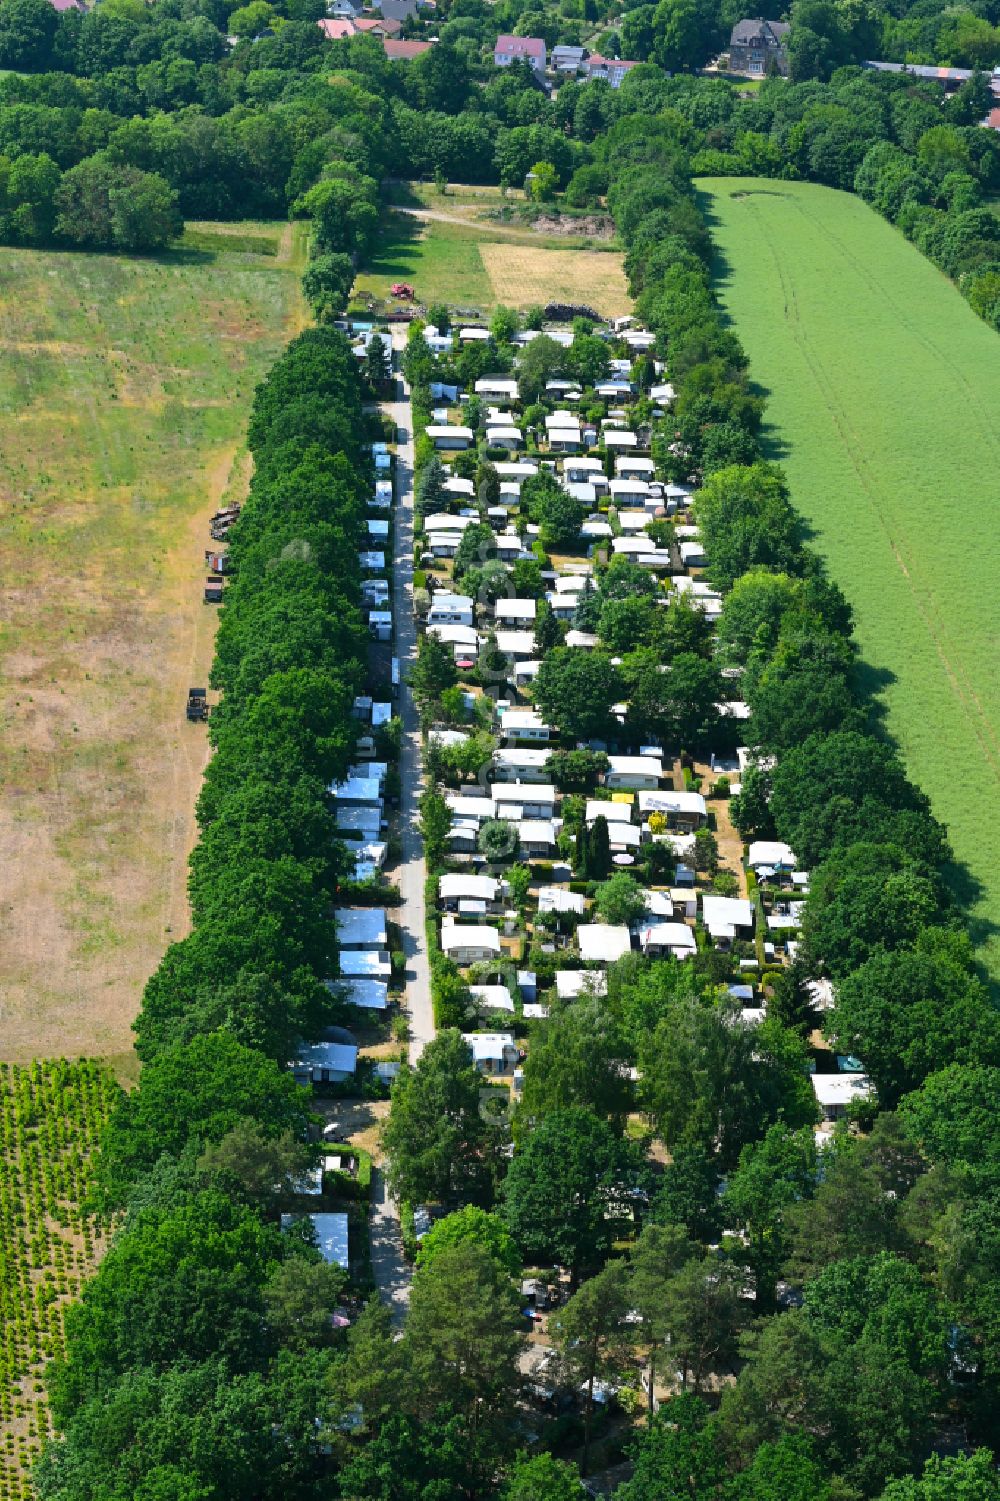 Tiefensee from the bird's eye view: Camping with caravans and tents on street Schmiedeweg in Tiefensee in the state Brandenburg, Germany